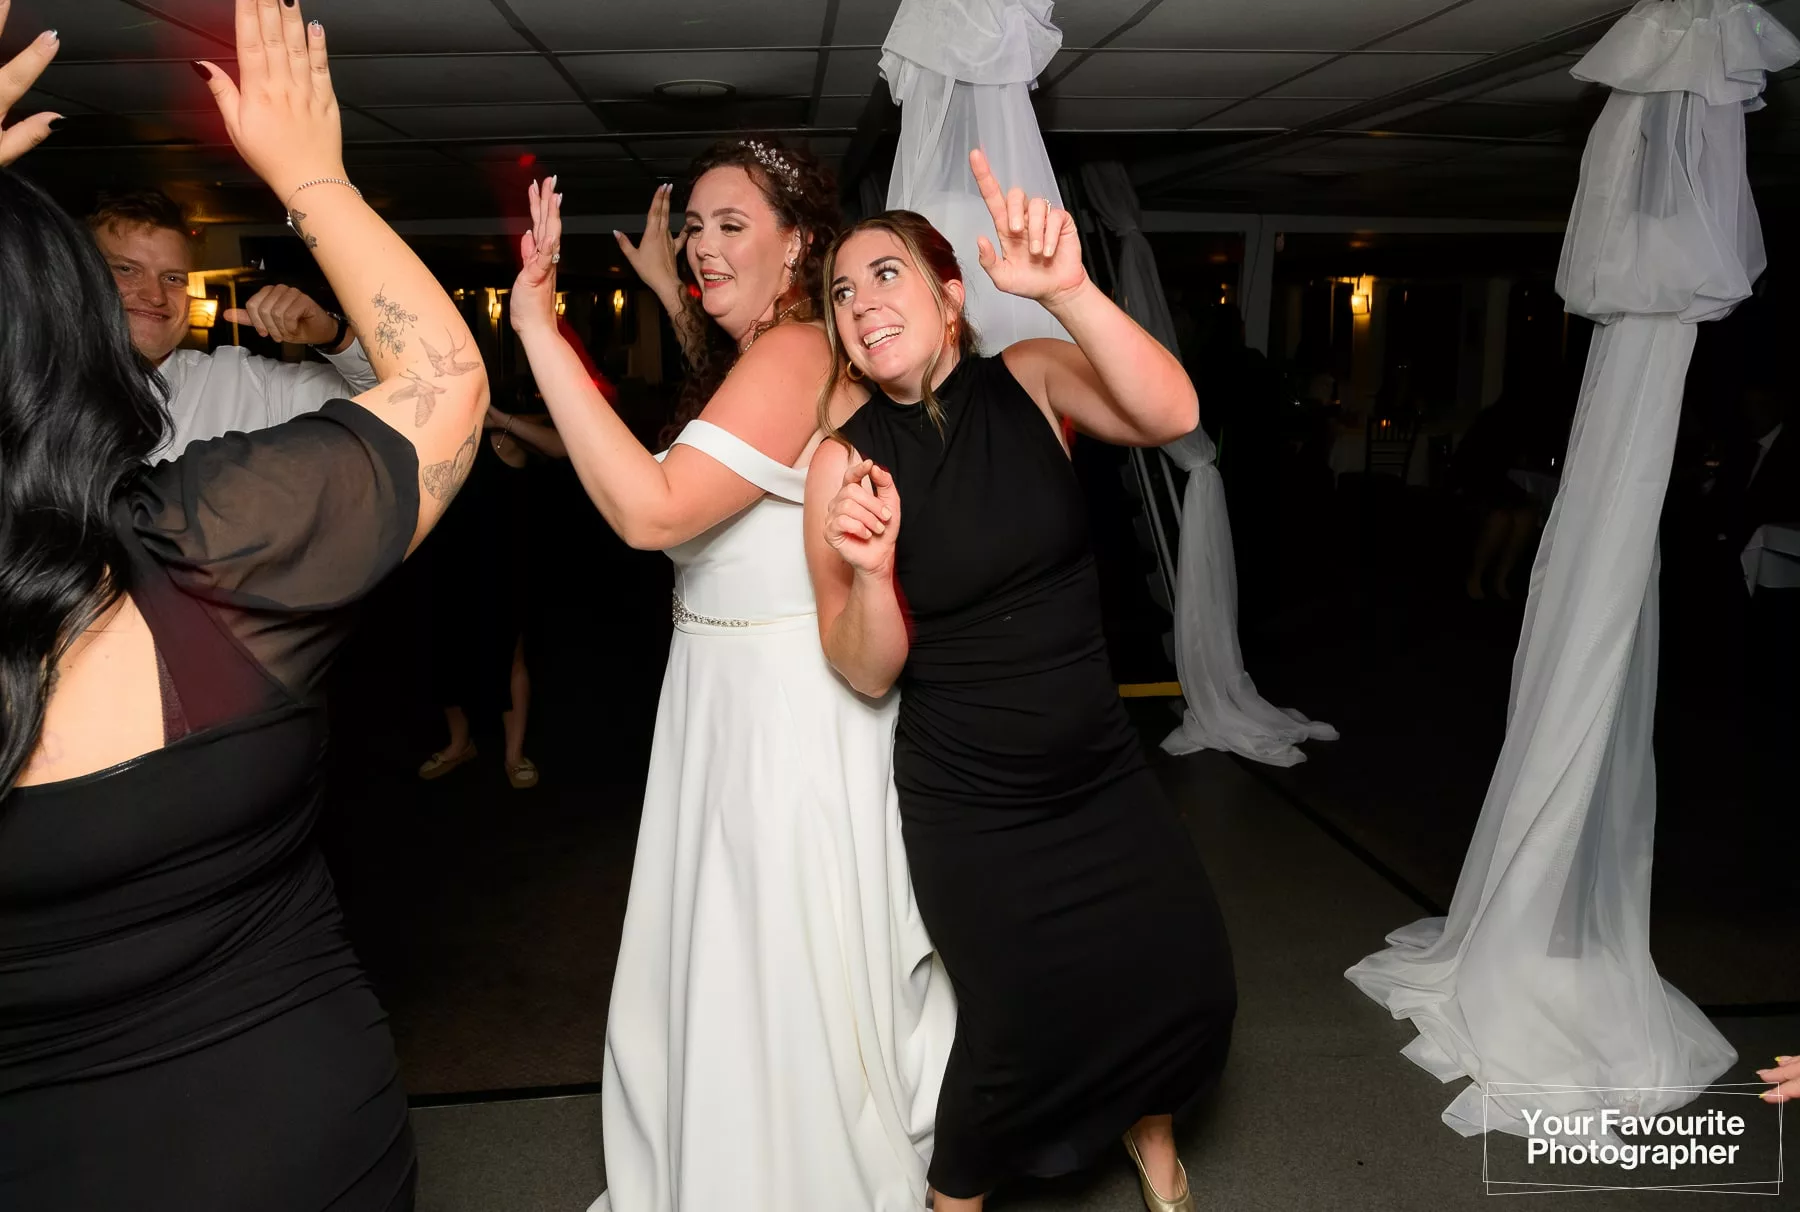 Bride and guests dancing during a wedding reception on a boat